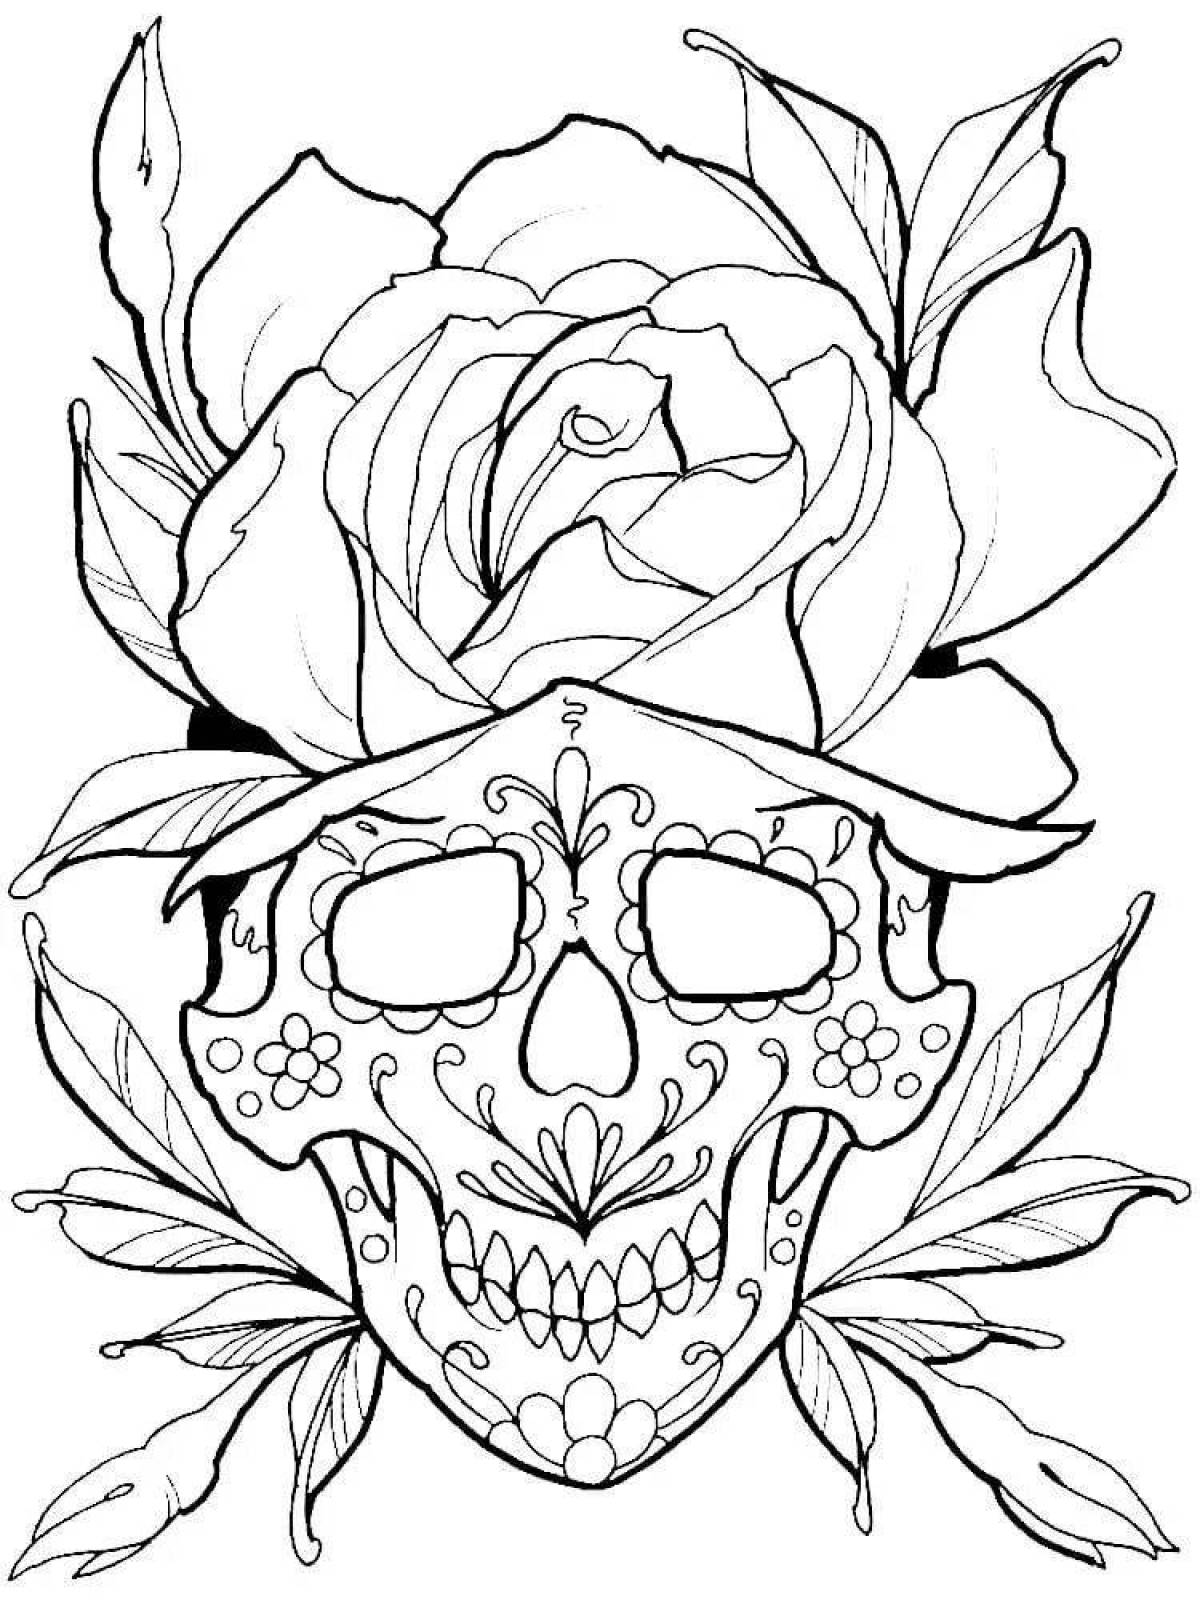 Attractive tattoo coloring book